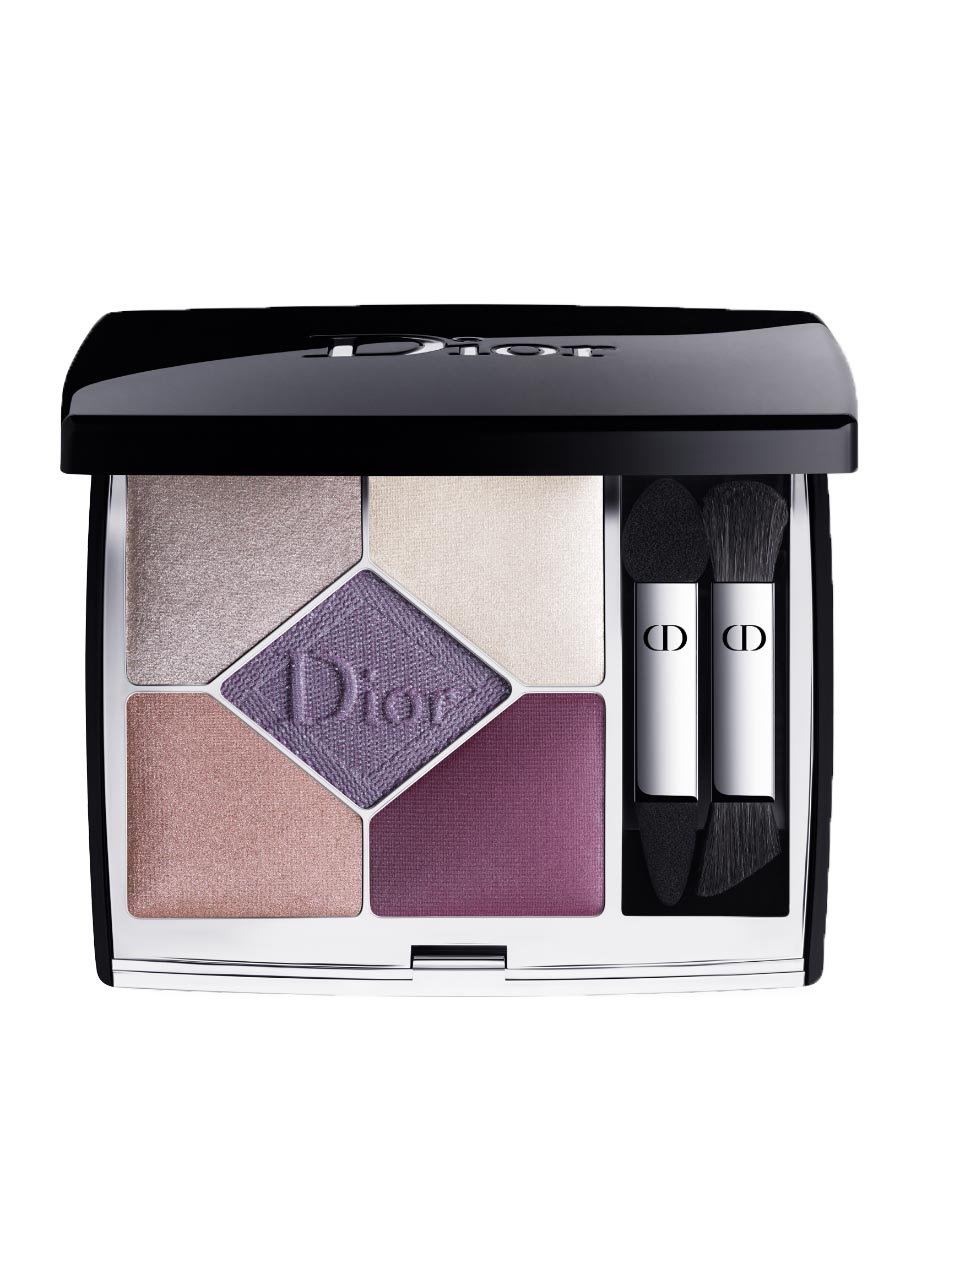 Dior 5 Couleurs Couture Eyeshadow Wardrobe N° 159 Plum Tulle 7 g null - onesize - 1